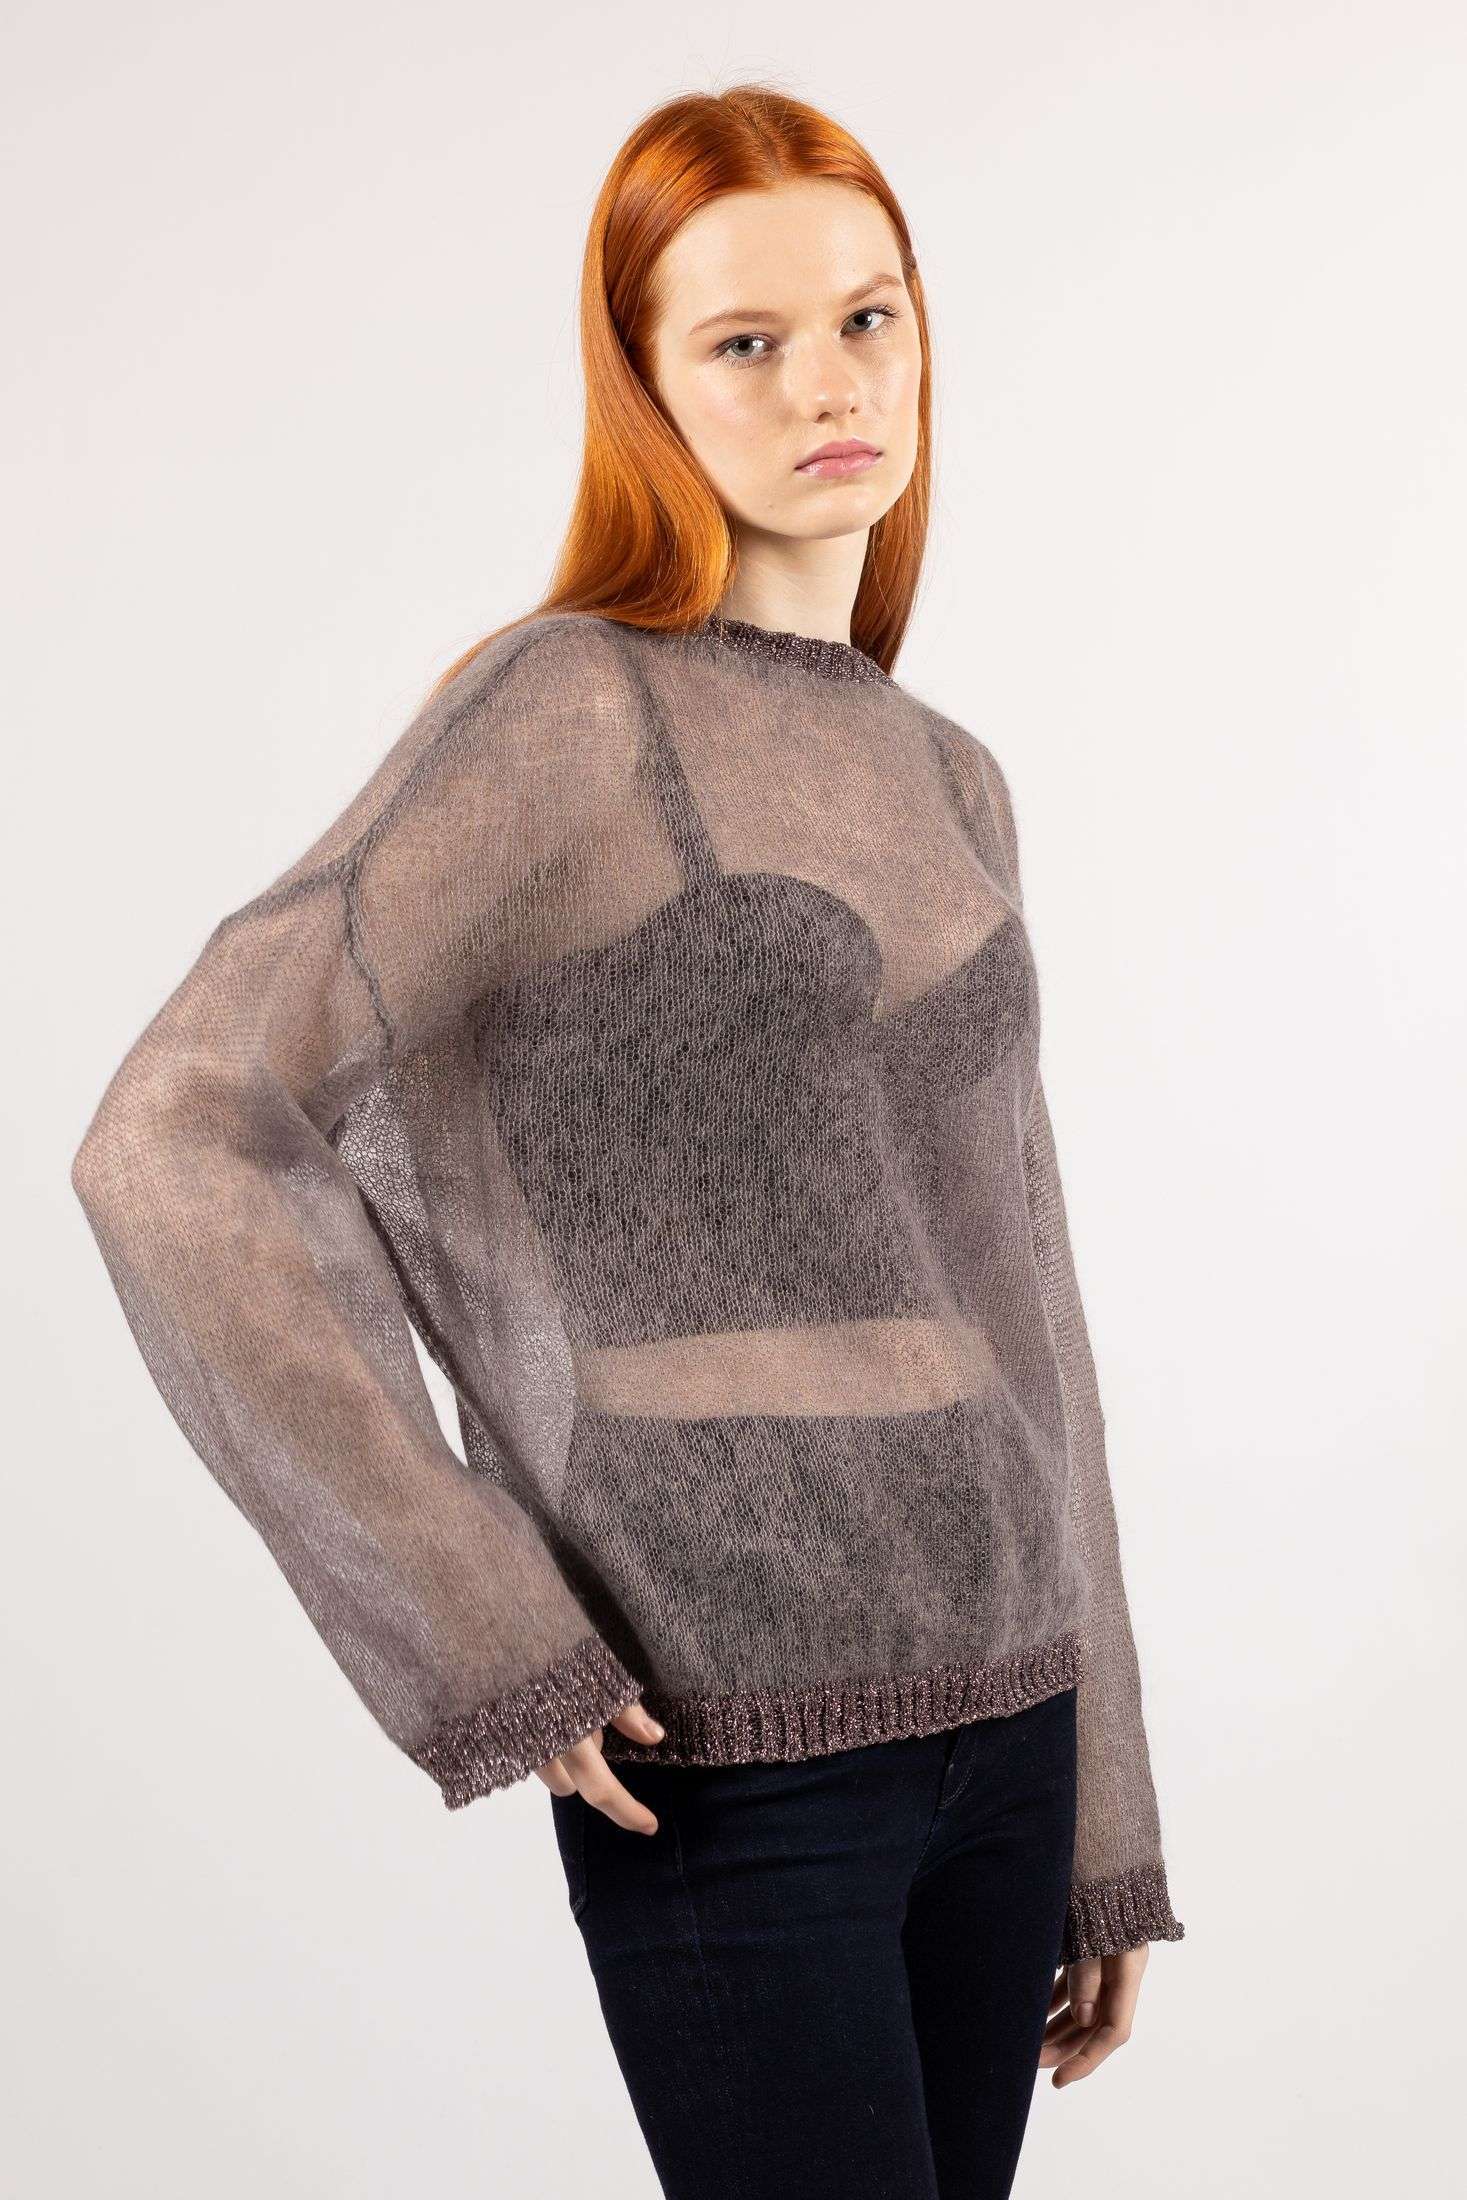 Luna: Unveil winter charm with a brown mohair sweater and delicate transparent knit.